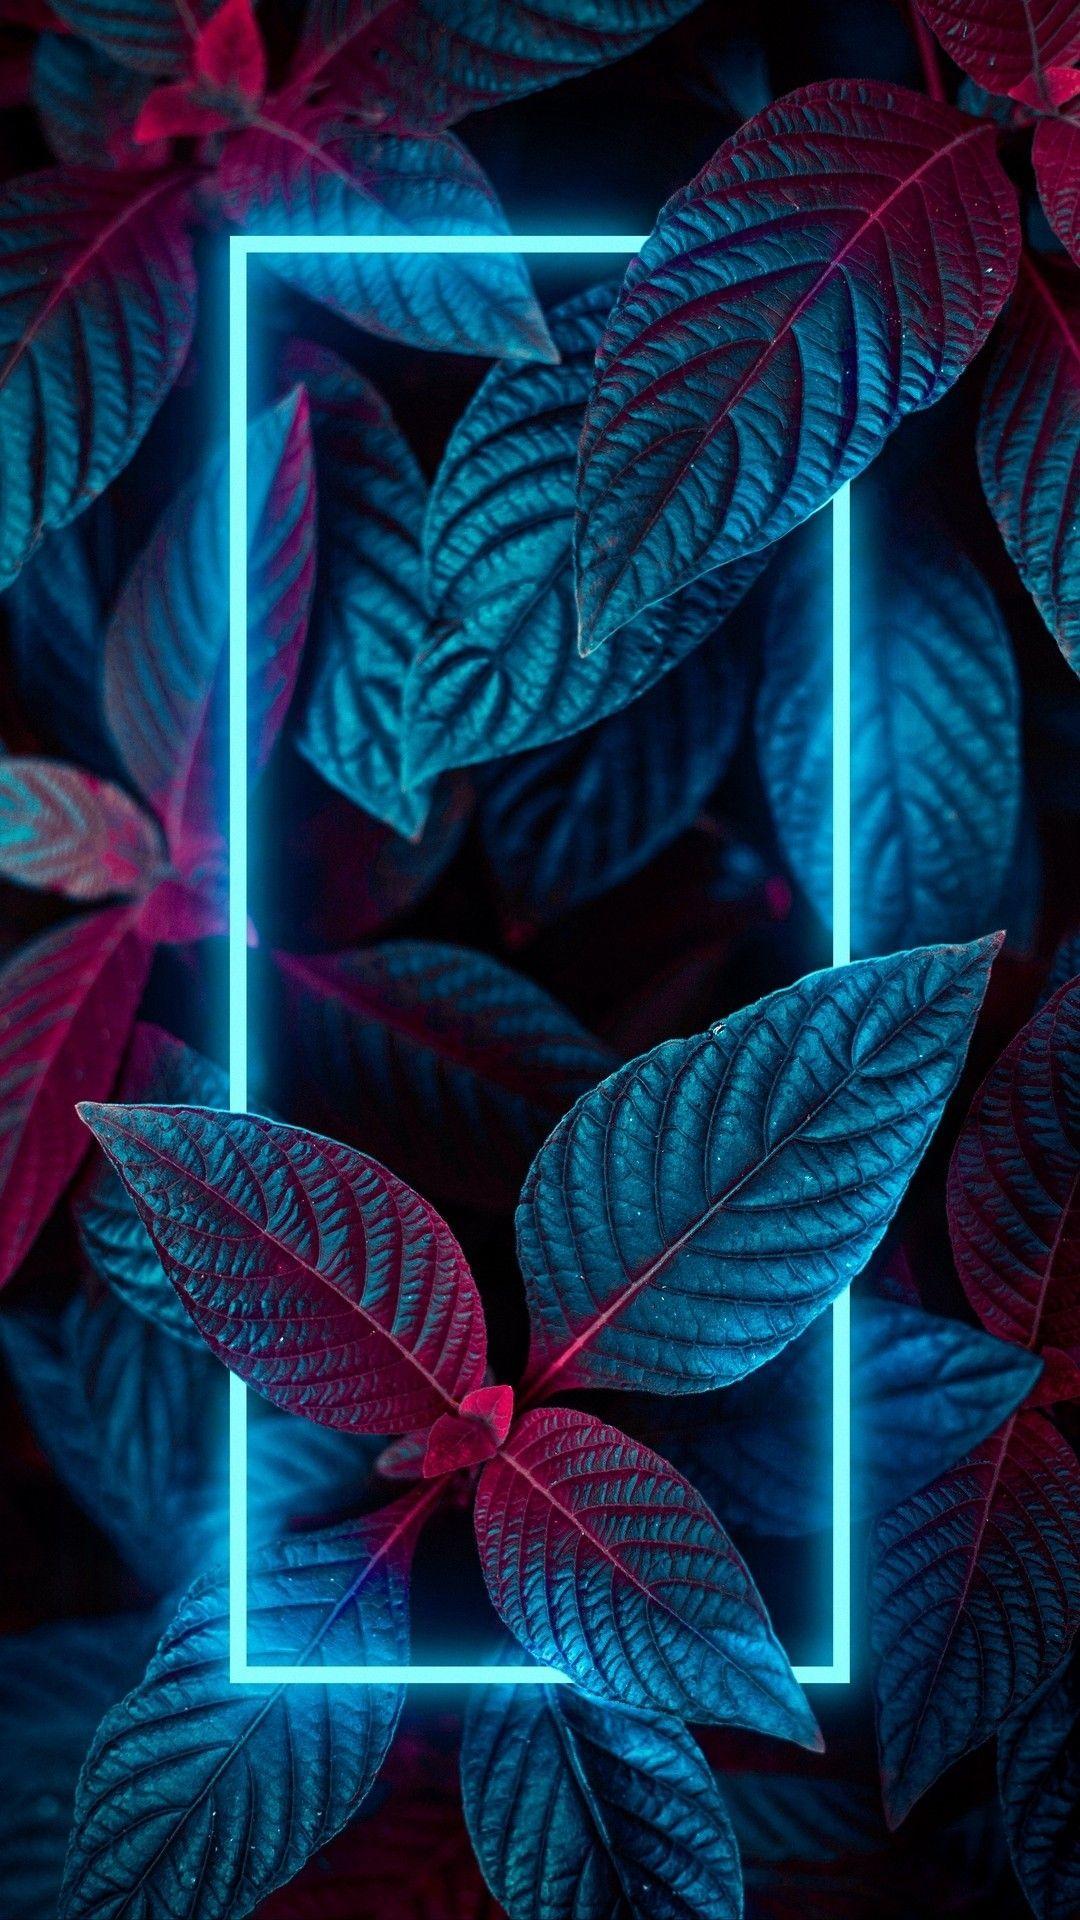 1080 x 1920 · jpeg - Paper walls neon plants | Iphone wallpaper photos, Cool wallpapers for ...